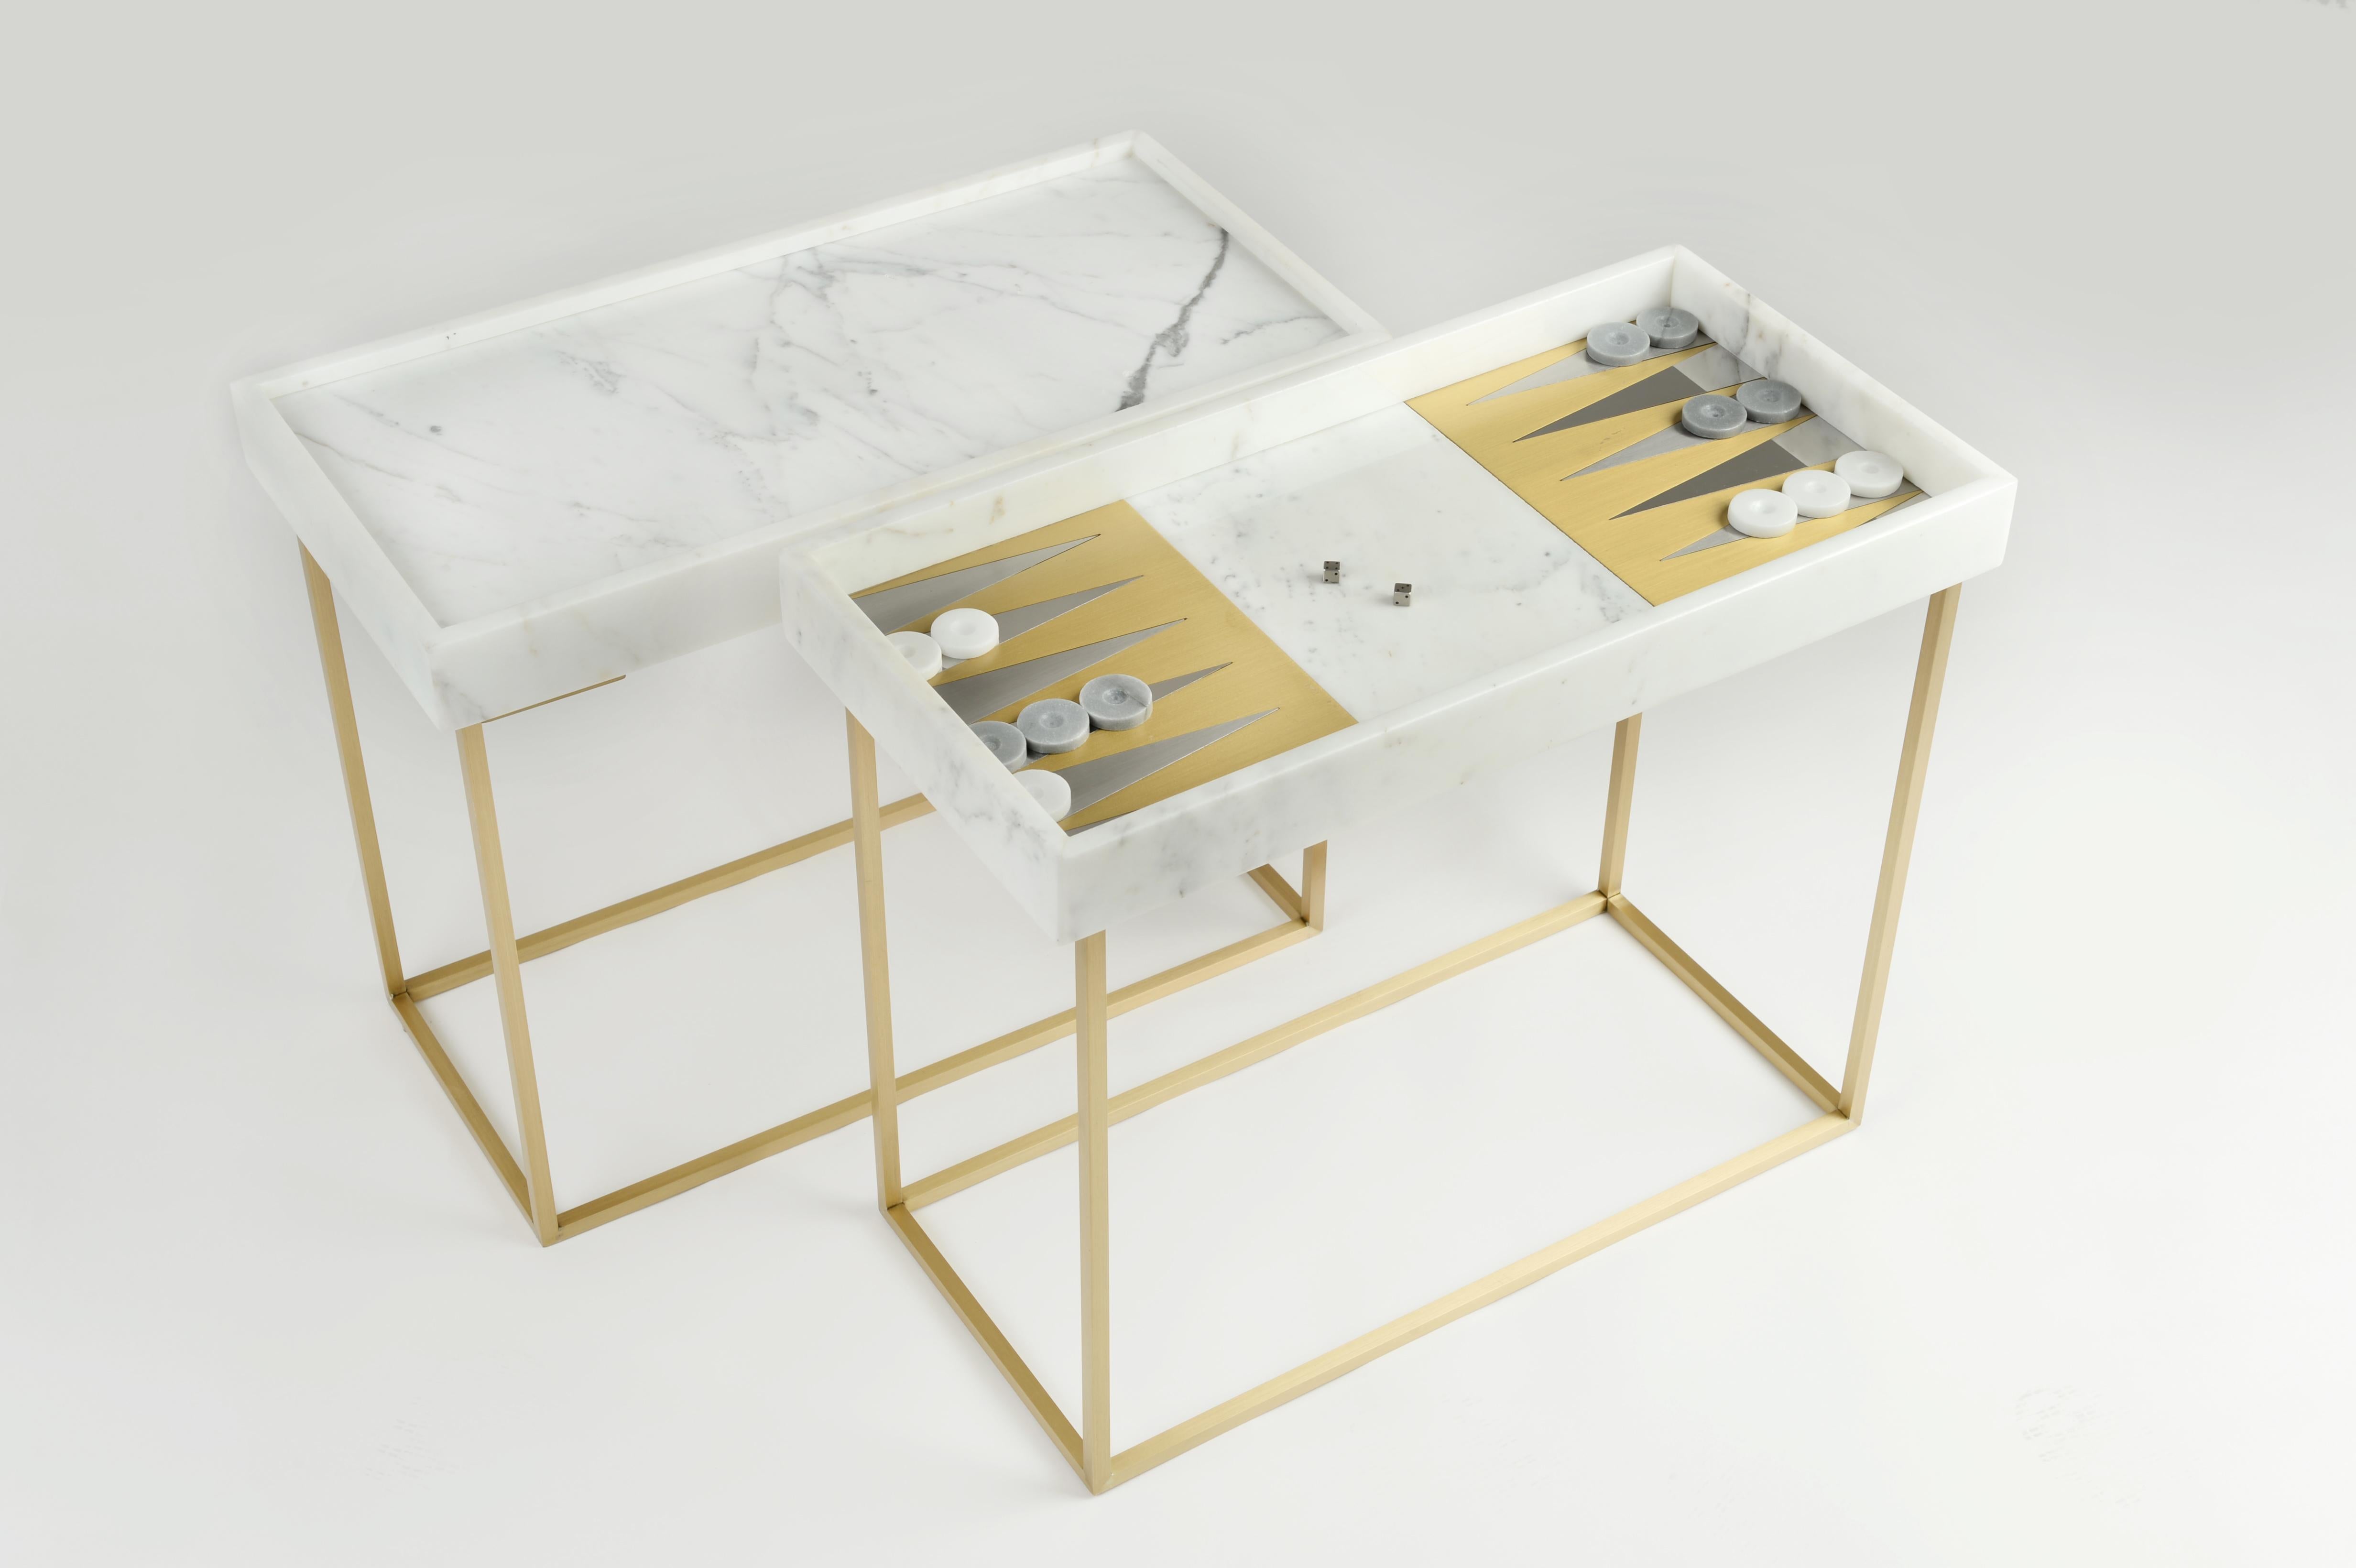 Play backgammon table by Saccal Design House
Dimensions: L 49 x W 23 x H 45cm
Materials: Carrara and Brass

Saccal Design House, located in Beirut Lebanon, was founded in 2014 by two sisters Nour and Maysa Saccal.
The company provides interior